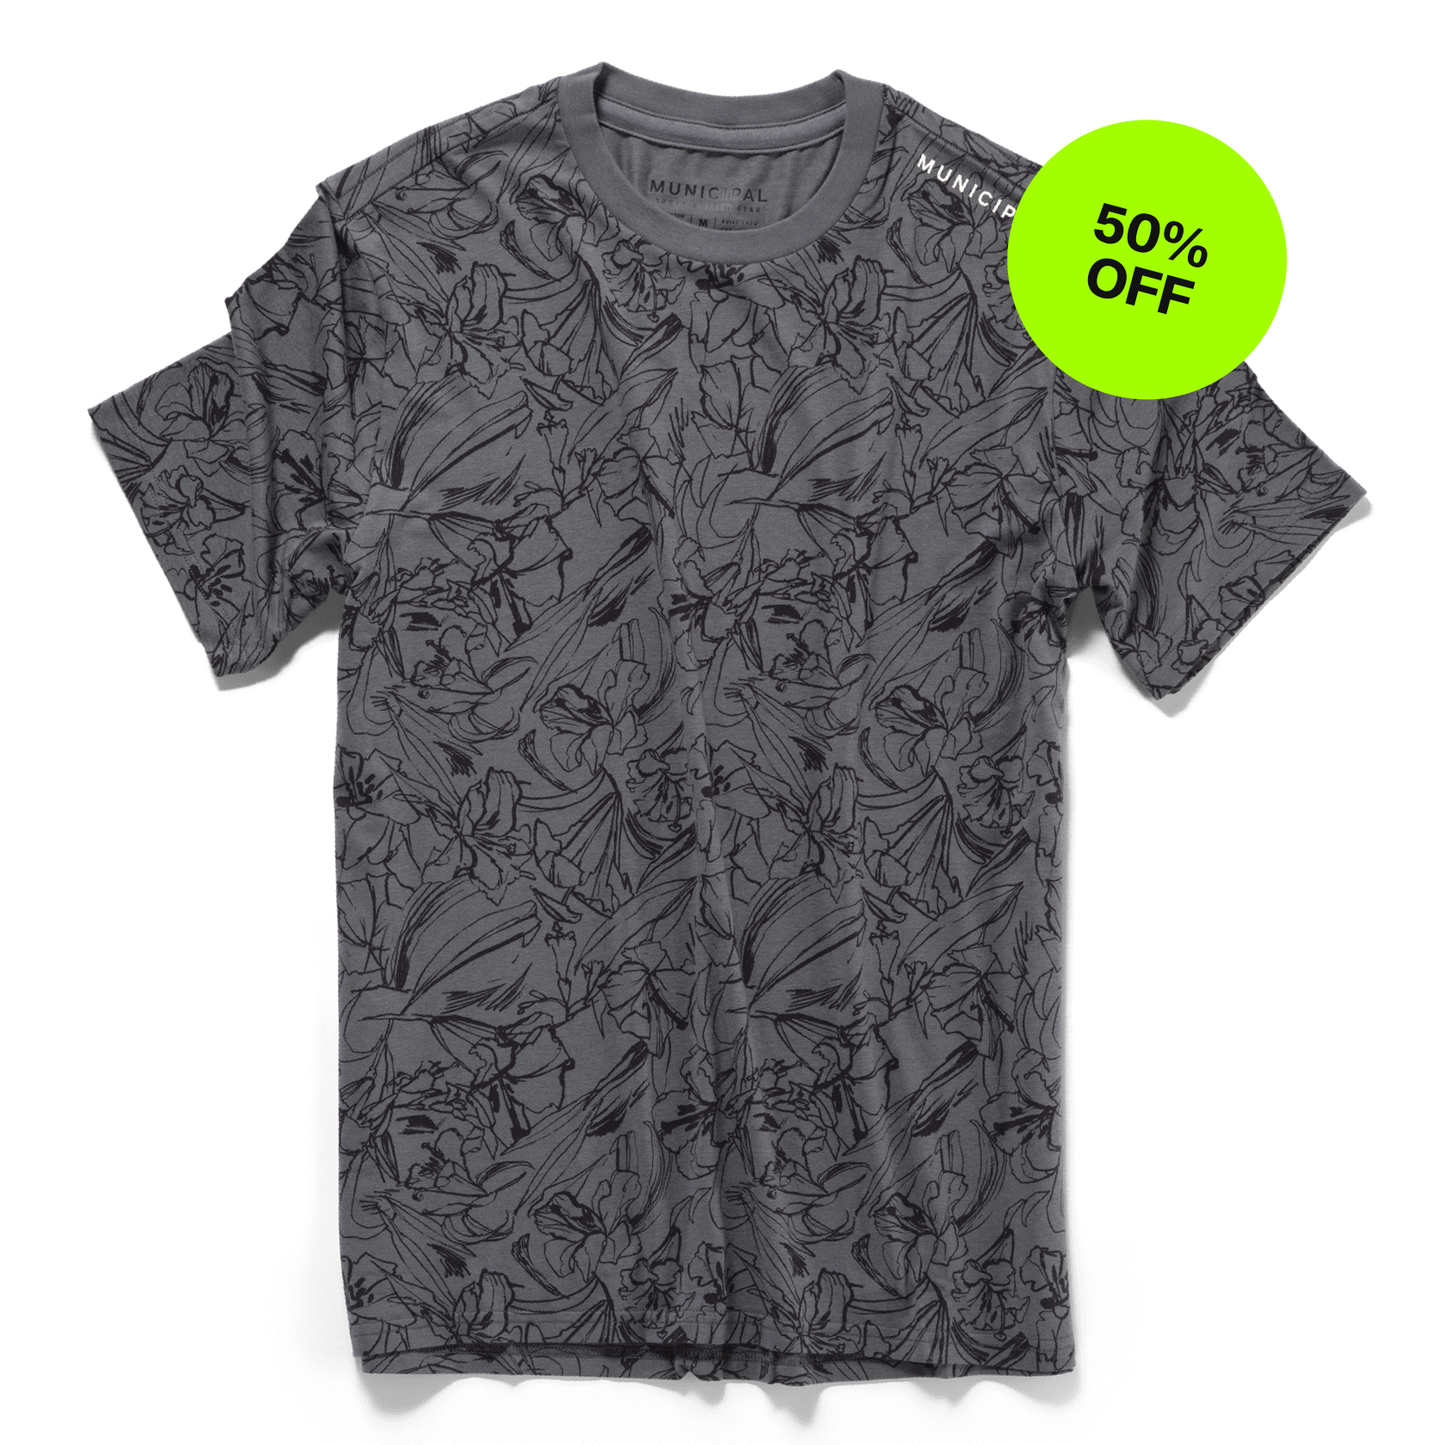 Enduro Stretch T-Shirt |Charcoal Sketch Floral / Natural| front